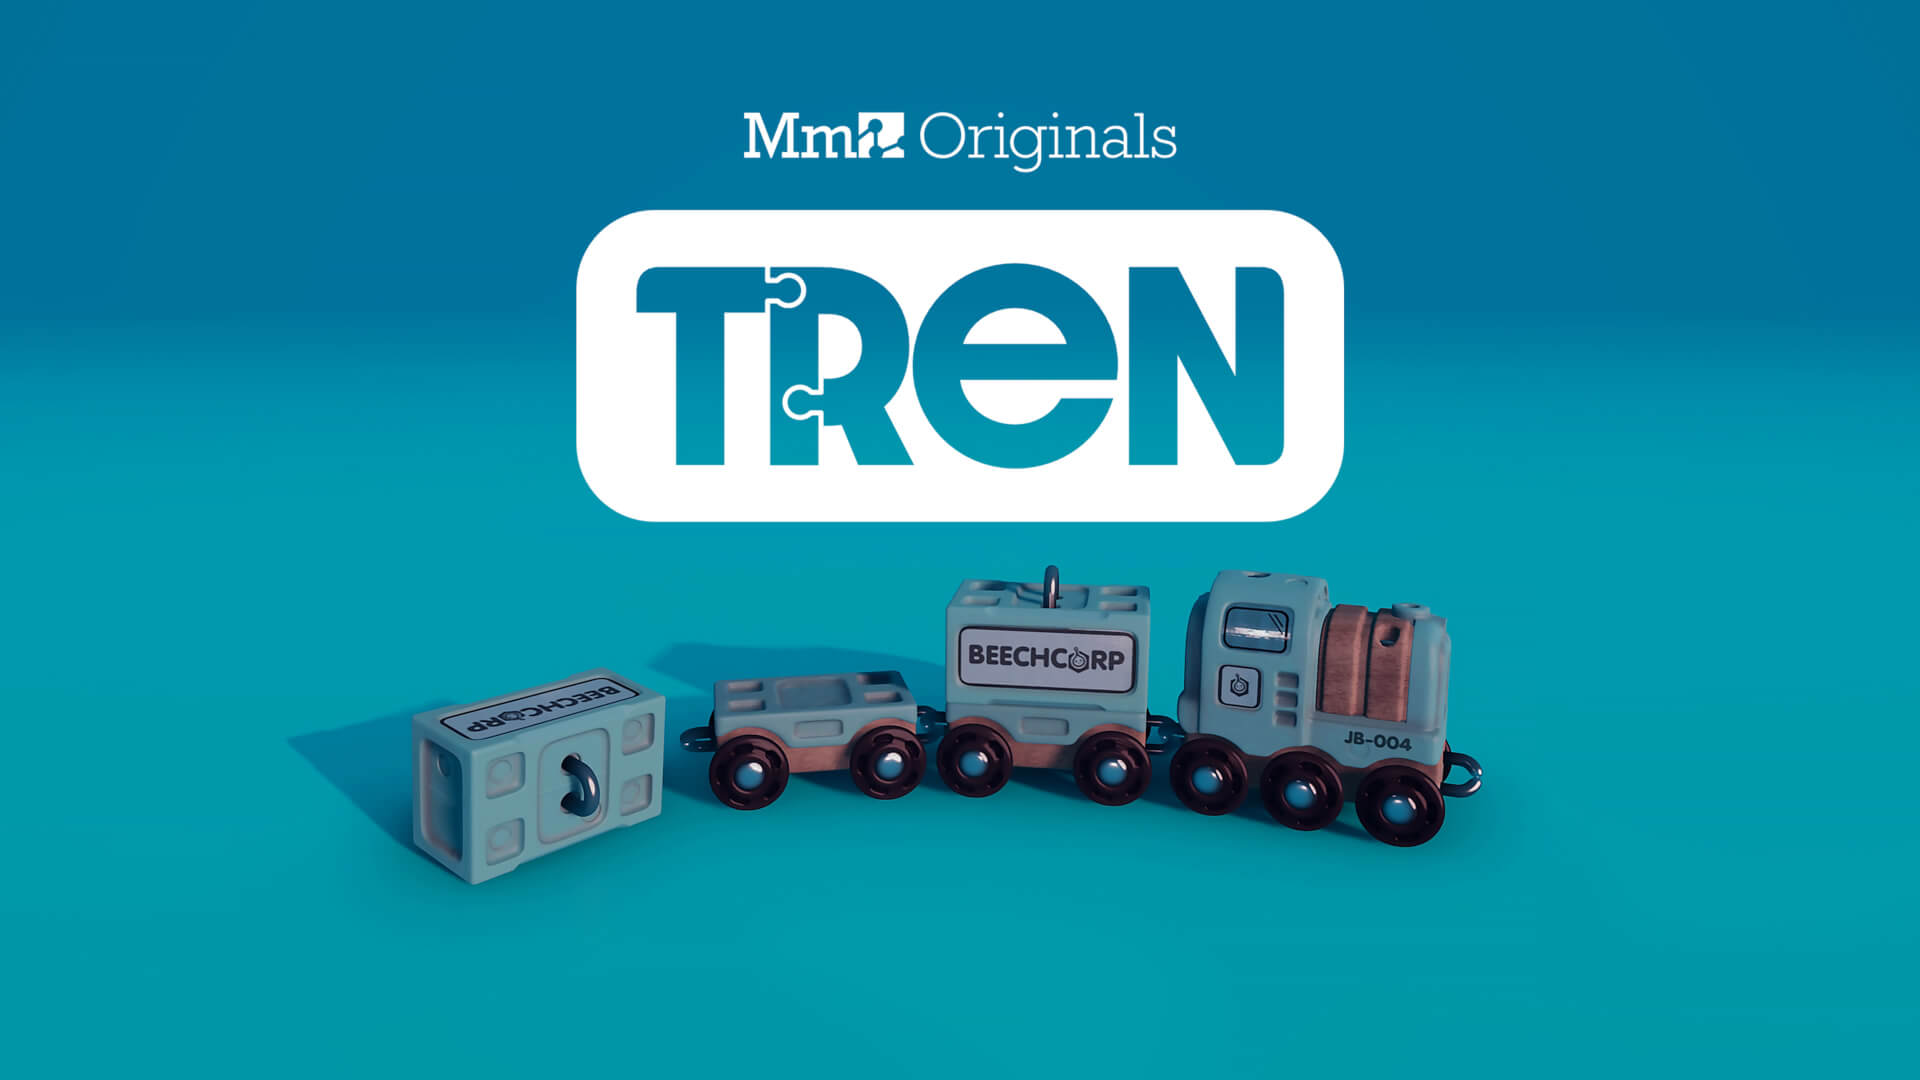 A teaser image for Tren, a new Made In Dreams project by Media Molecule designer John Beech